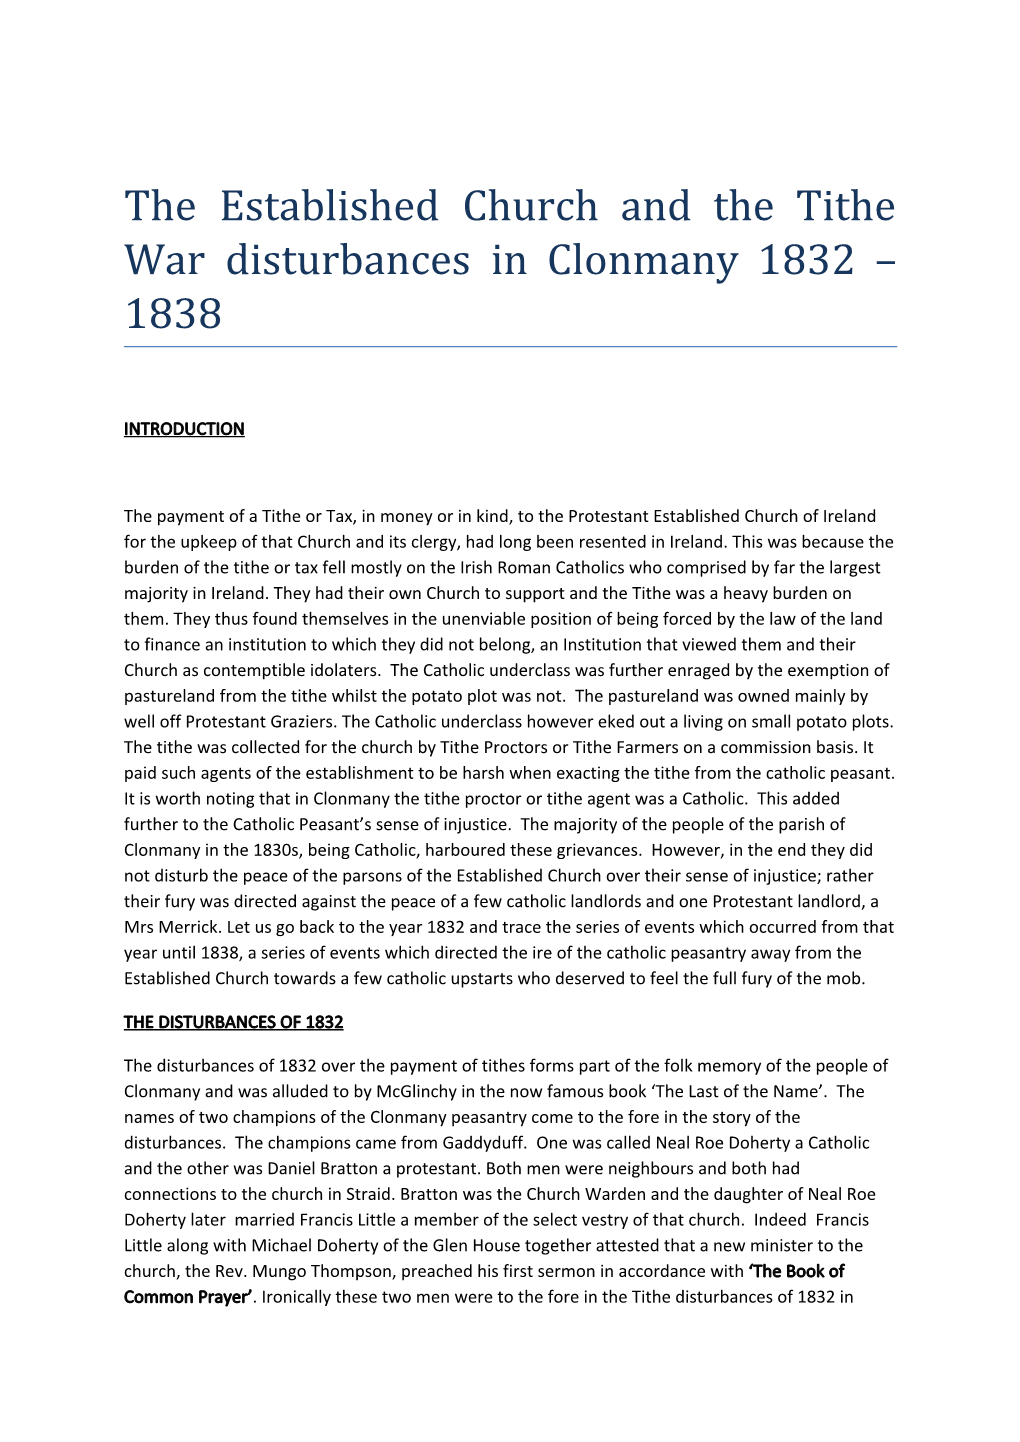 The Established Church and the Tithe War Disturbances in Clonmany 1832 – 1838